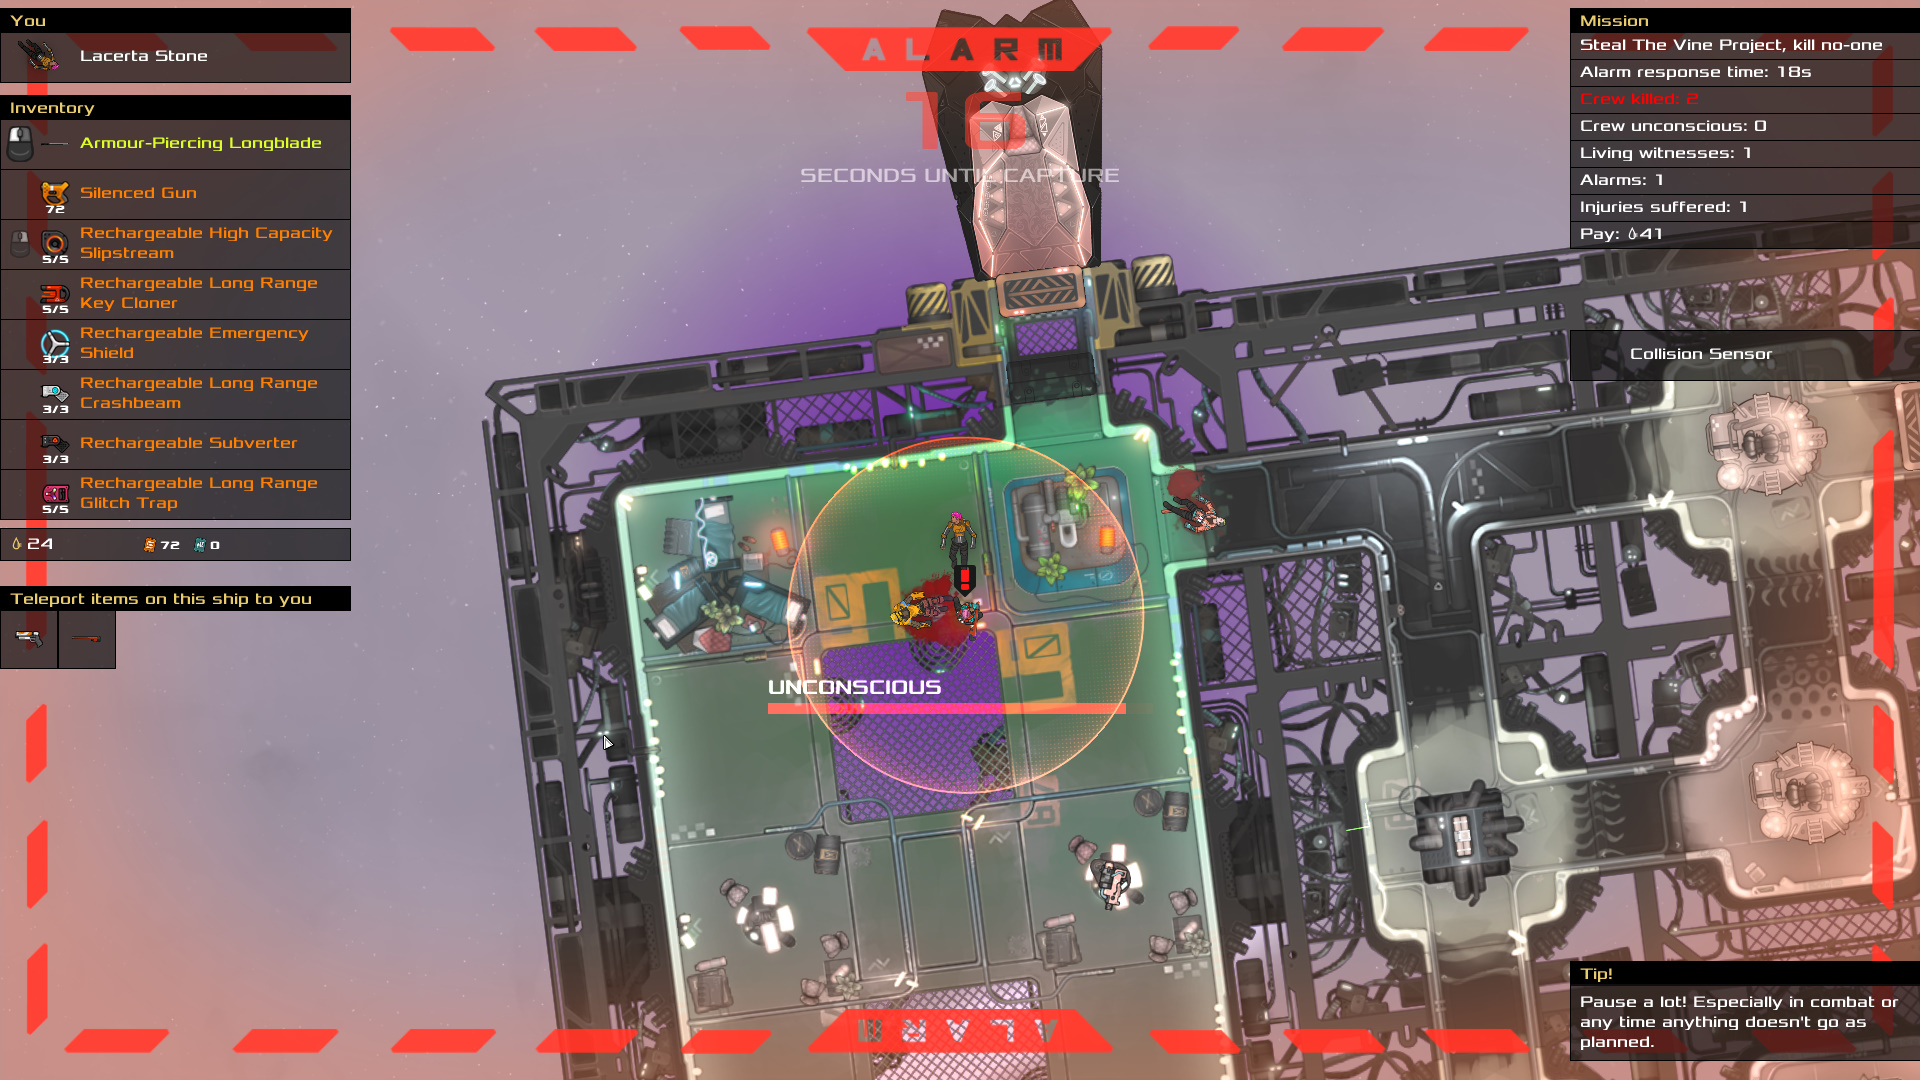 Heat Signature - The player explores a space ship while an alarm is displayed on screen.